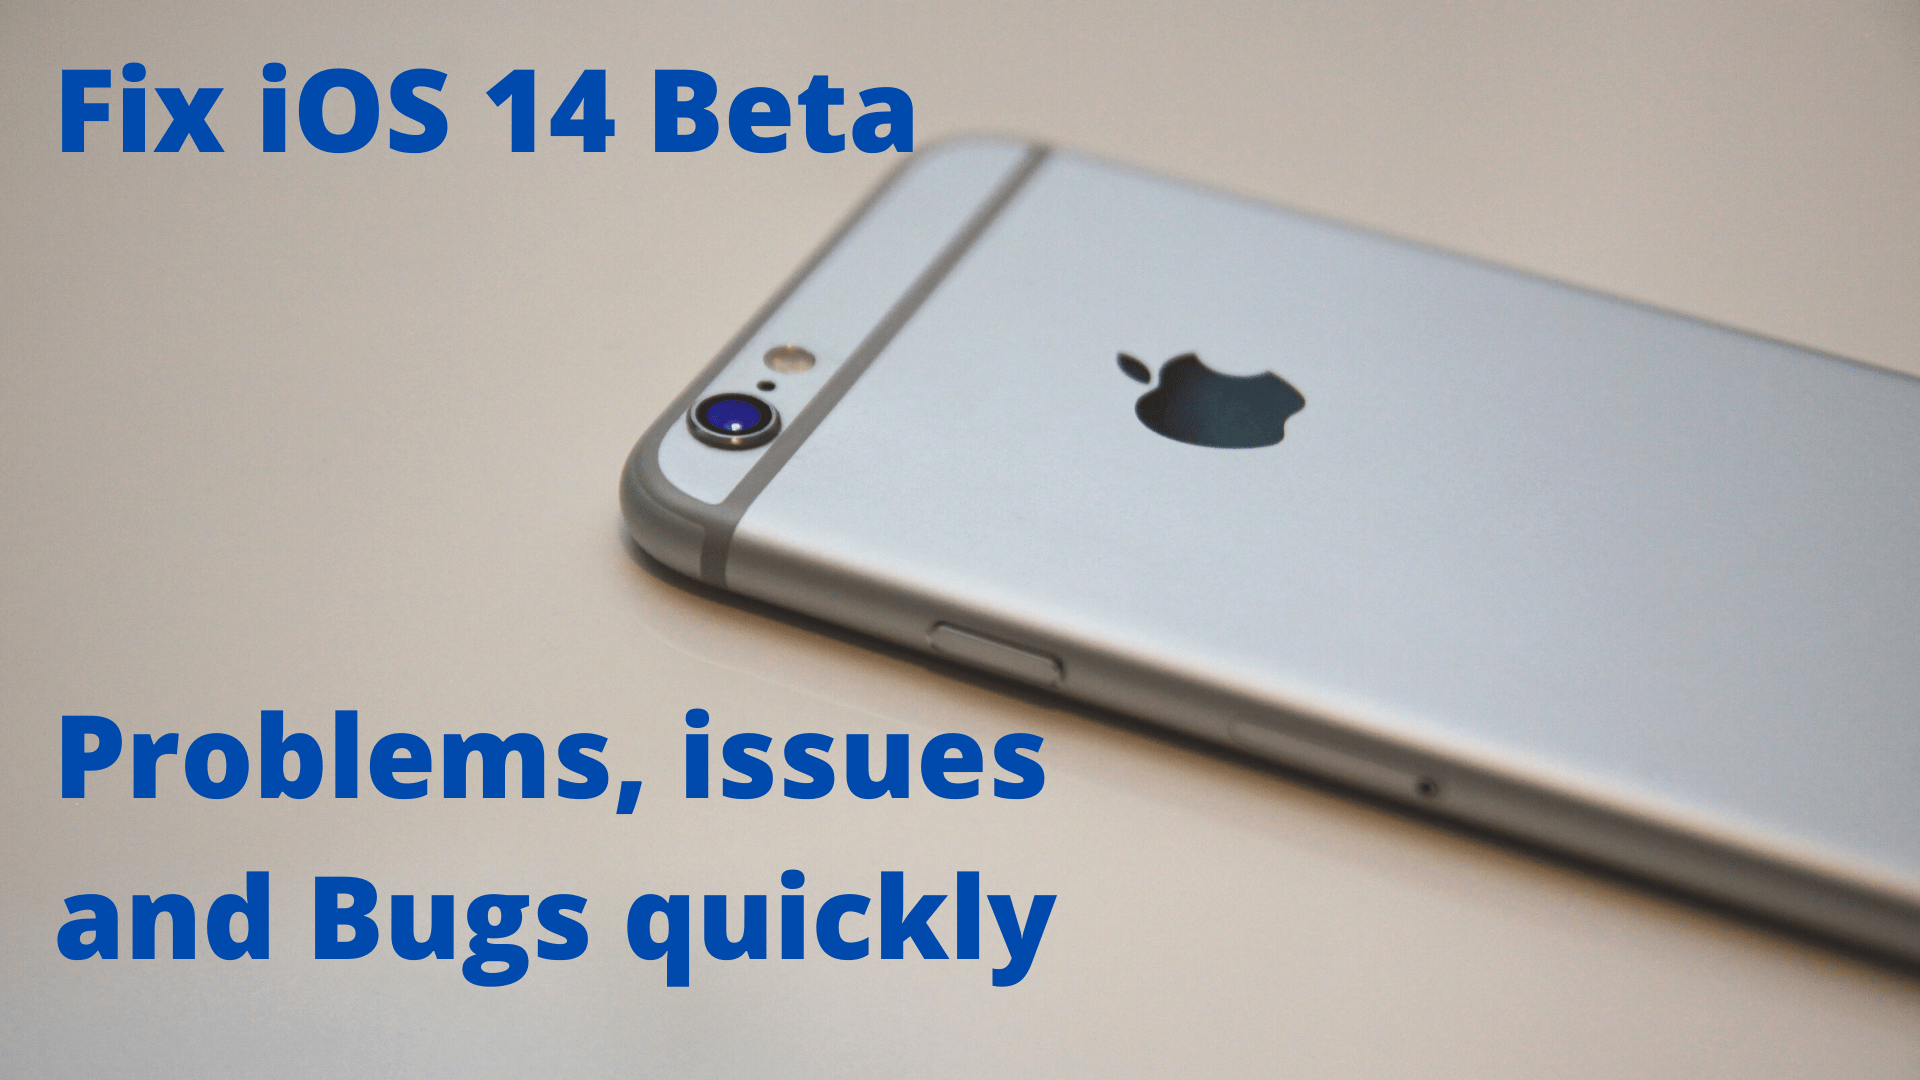 Fix iOS 14 Beta Problems, issues and Bugs quickly